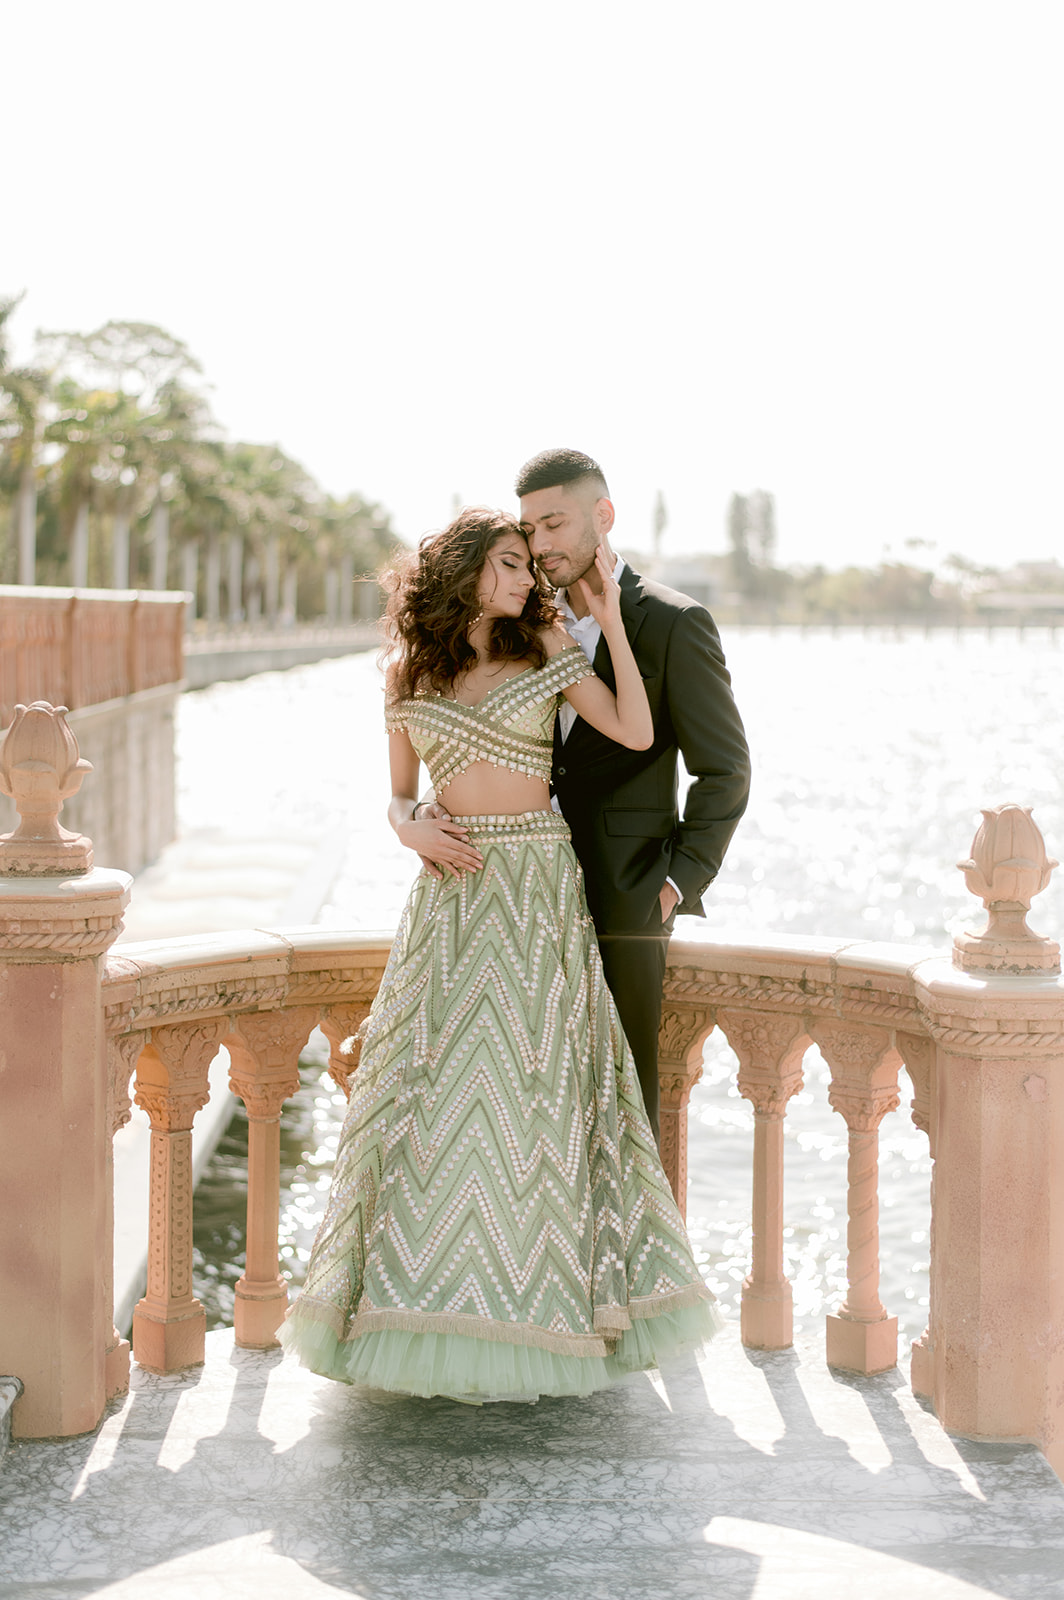 "Elegant and beautiful Ringling Museum engagement session with stunning Indian couple"
